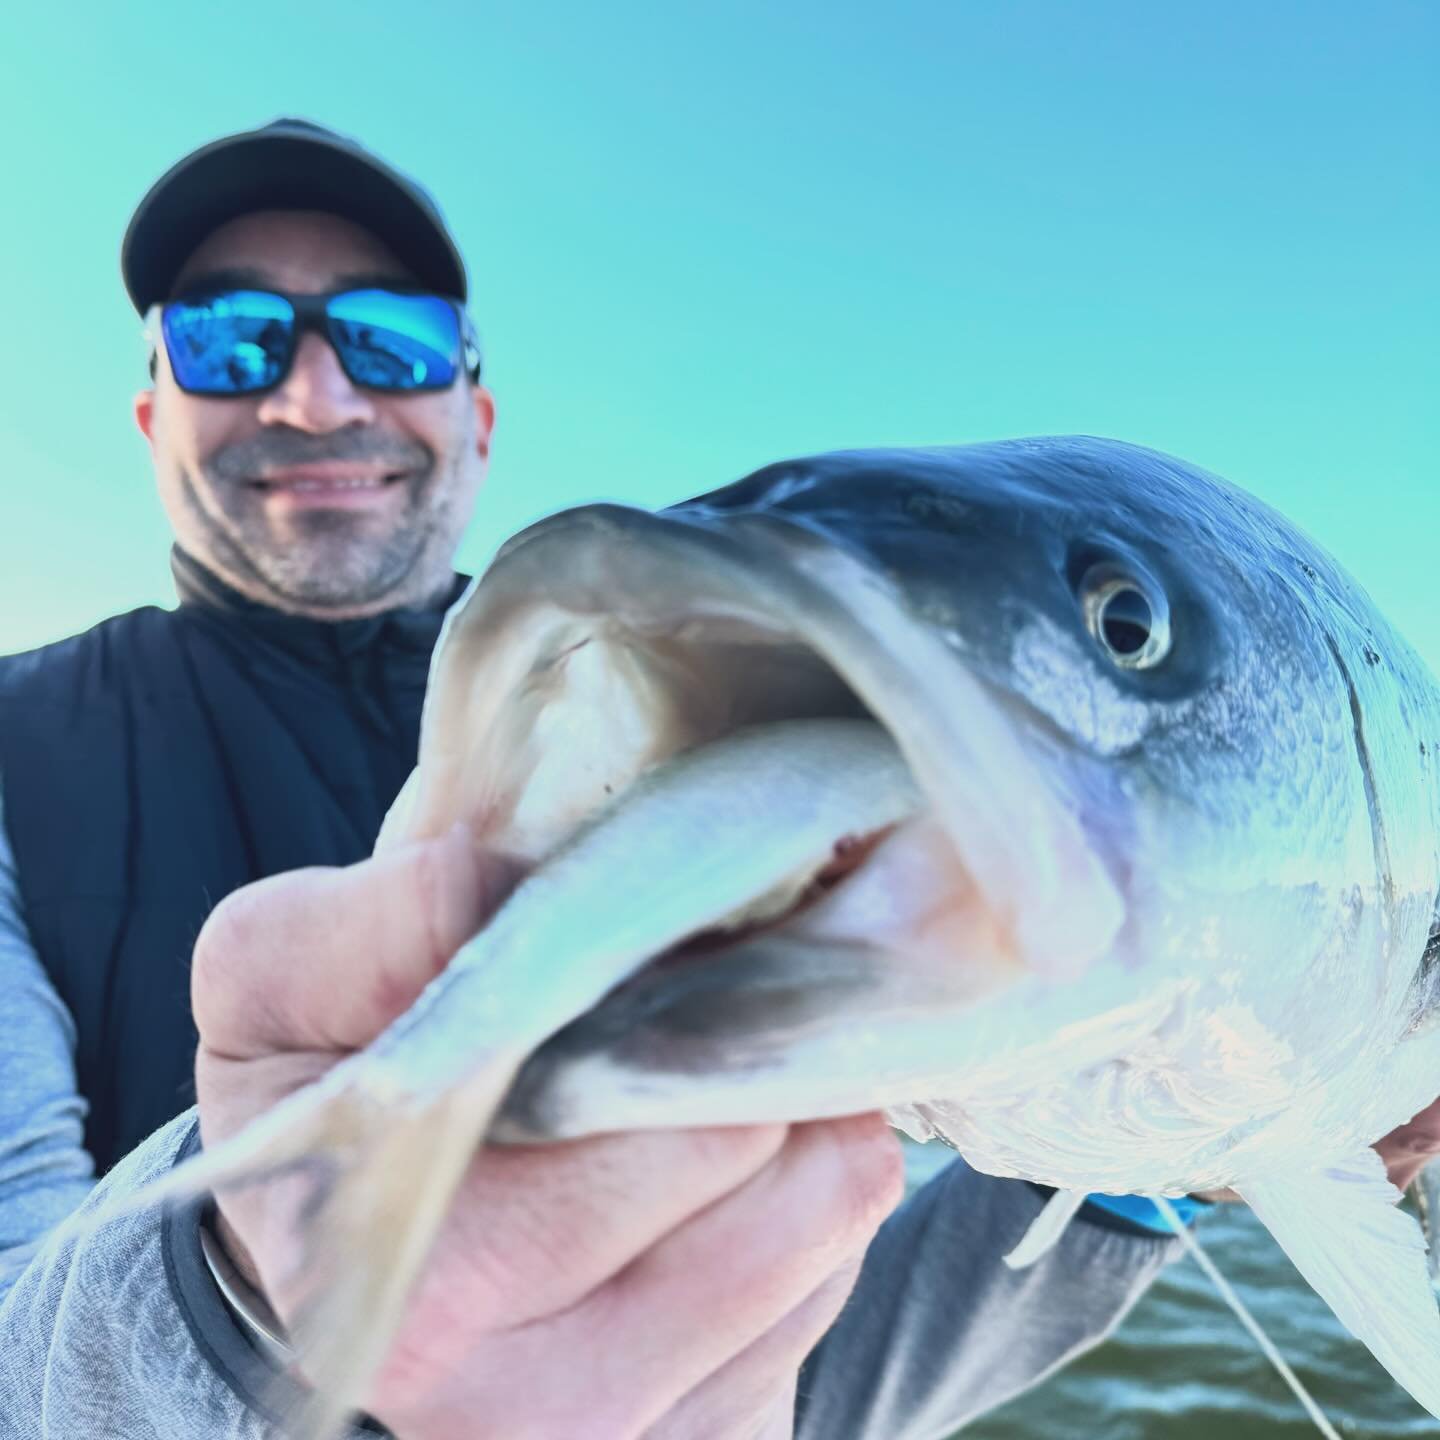 4/16/23 Report: 
Today was a little tougher than usual but we share the not so good reports too. This morning we had Rockfish regulars David &amp; Adam on for a morning bass charter. We had a good bite until the tide died then got another shot in ove